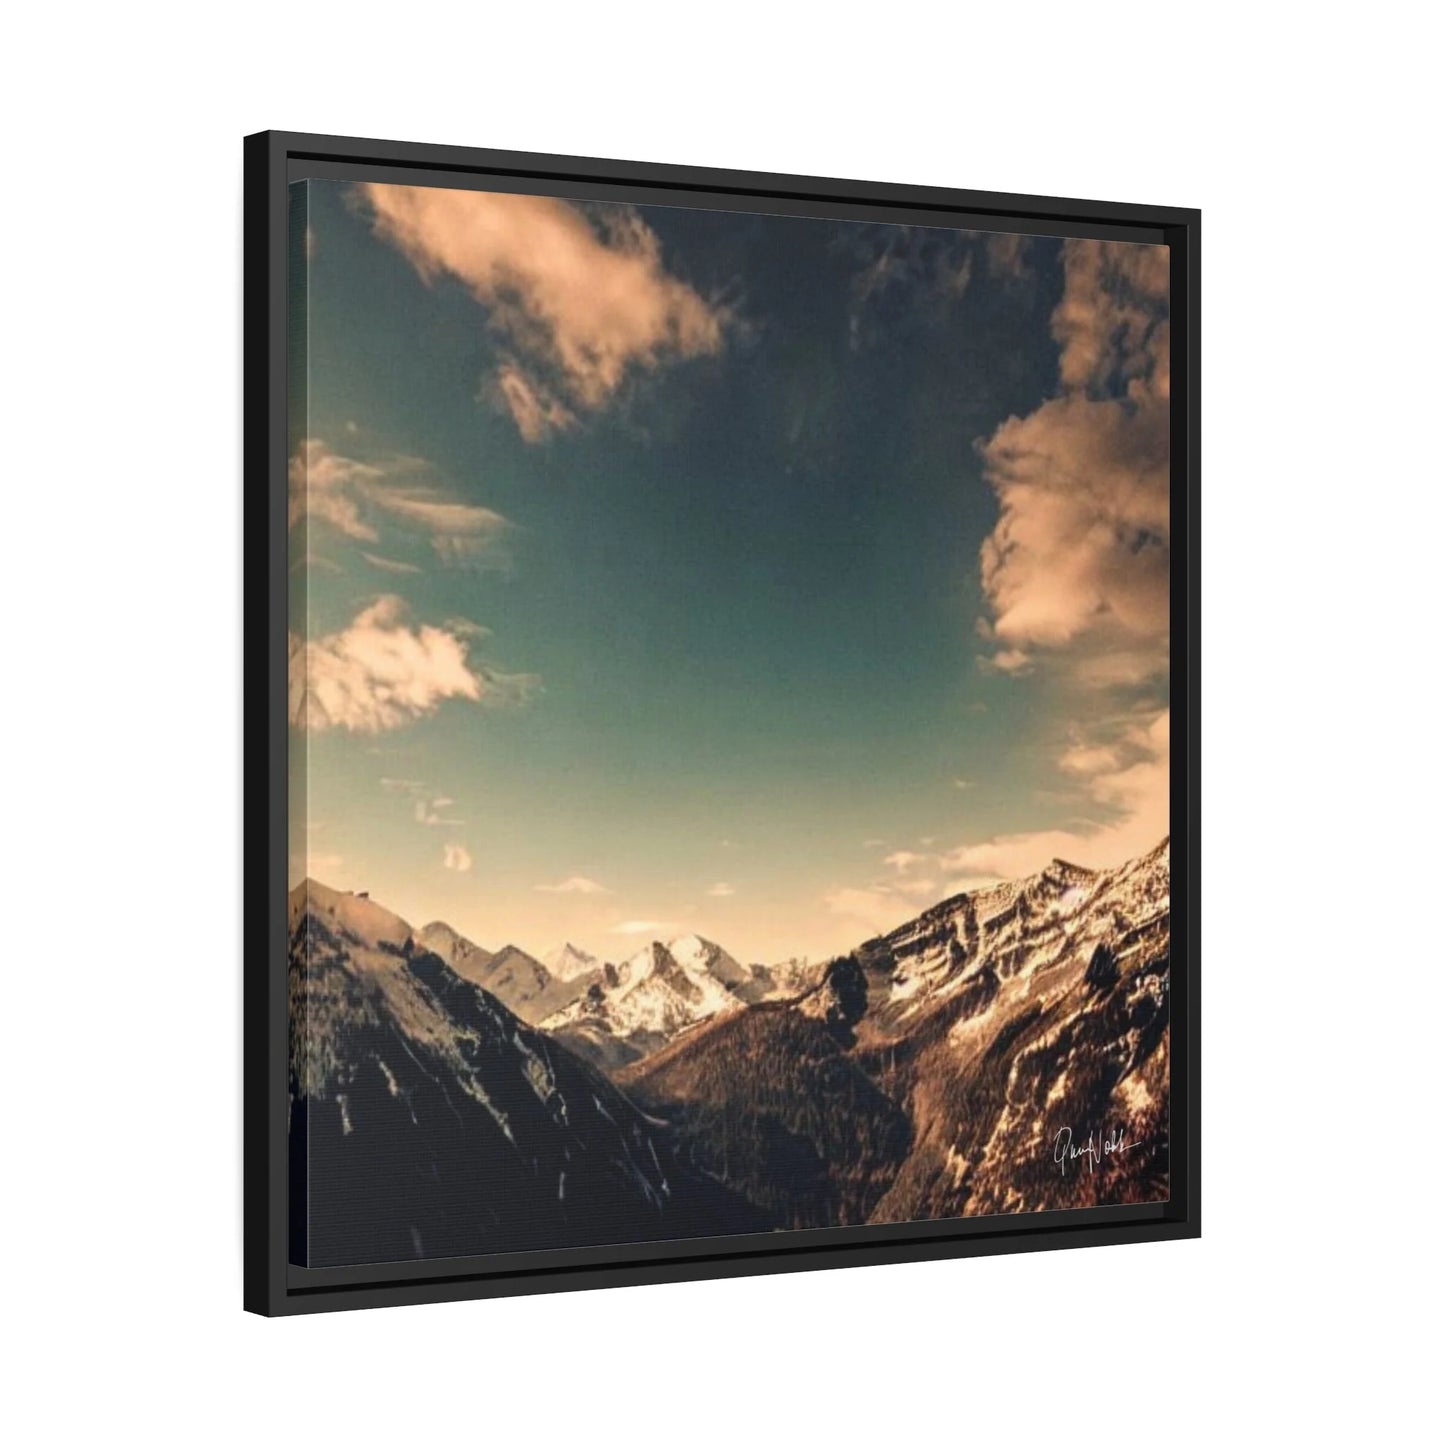 "Exquisite Framed Canvas Prints of Nature's Fine Art Photography by Queennoble"